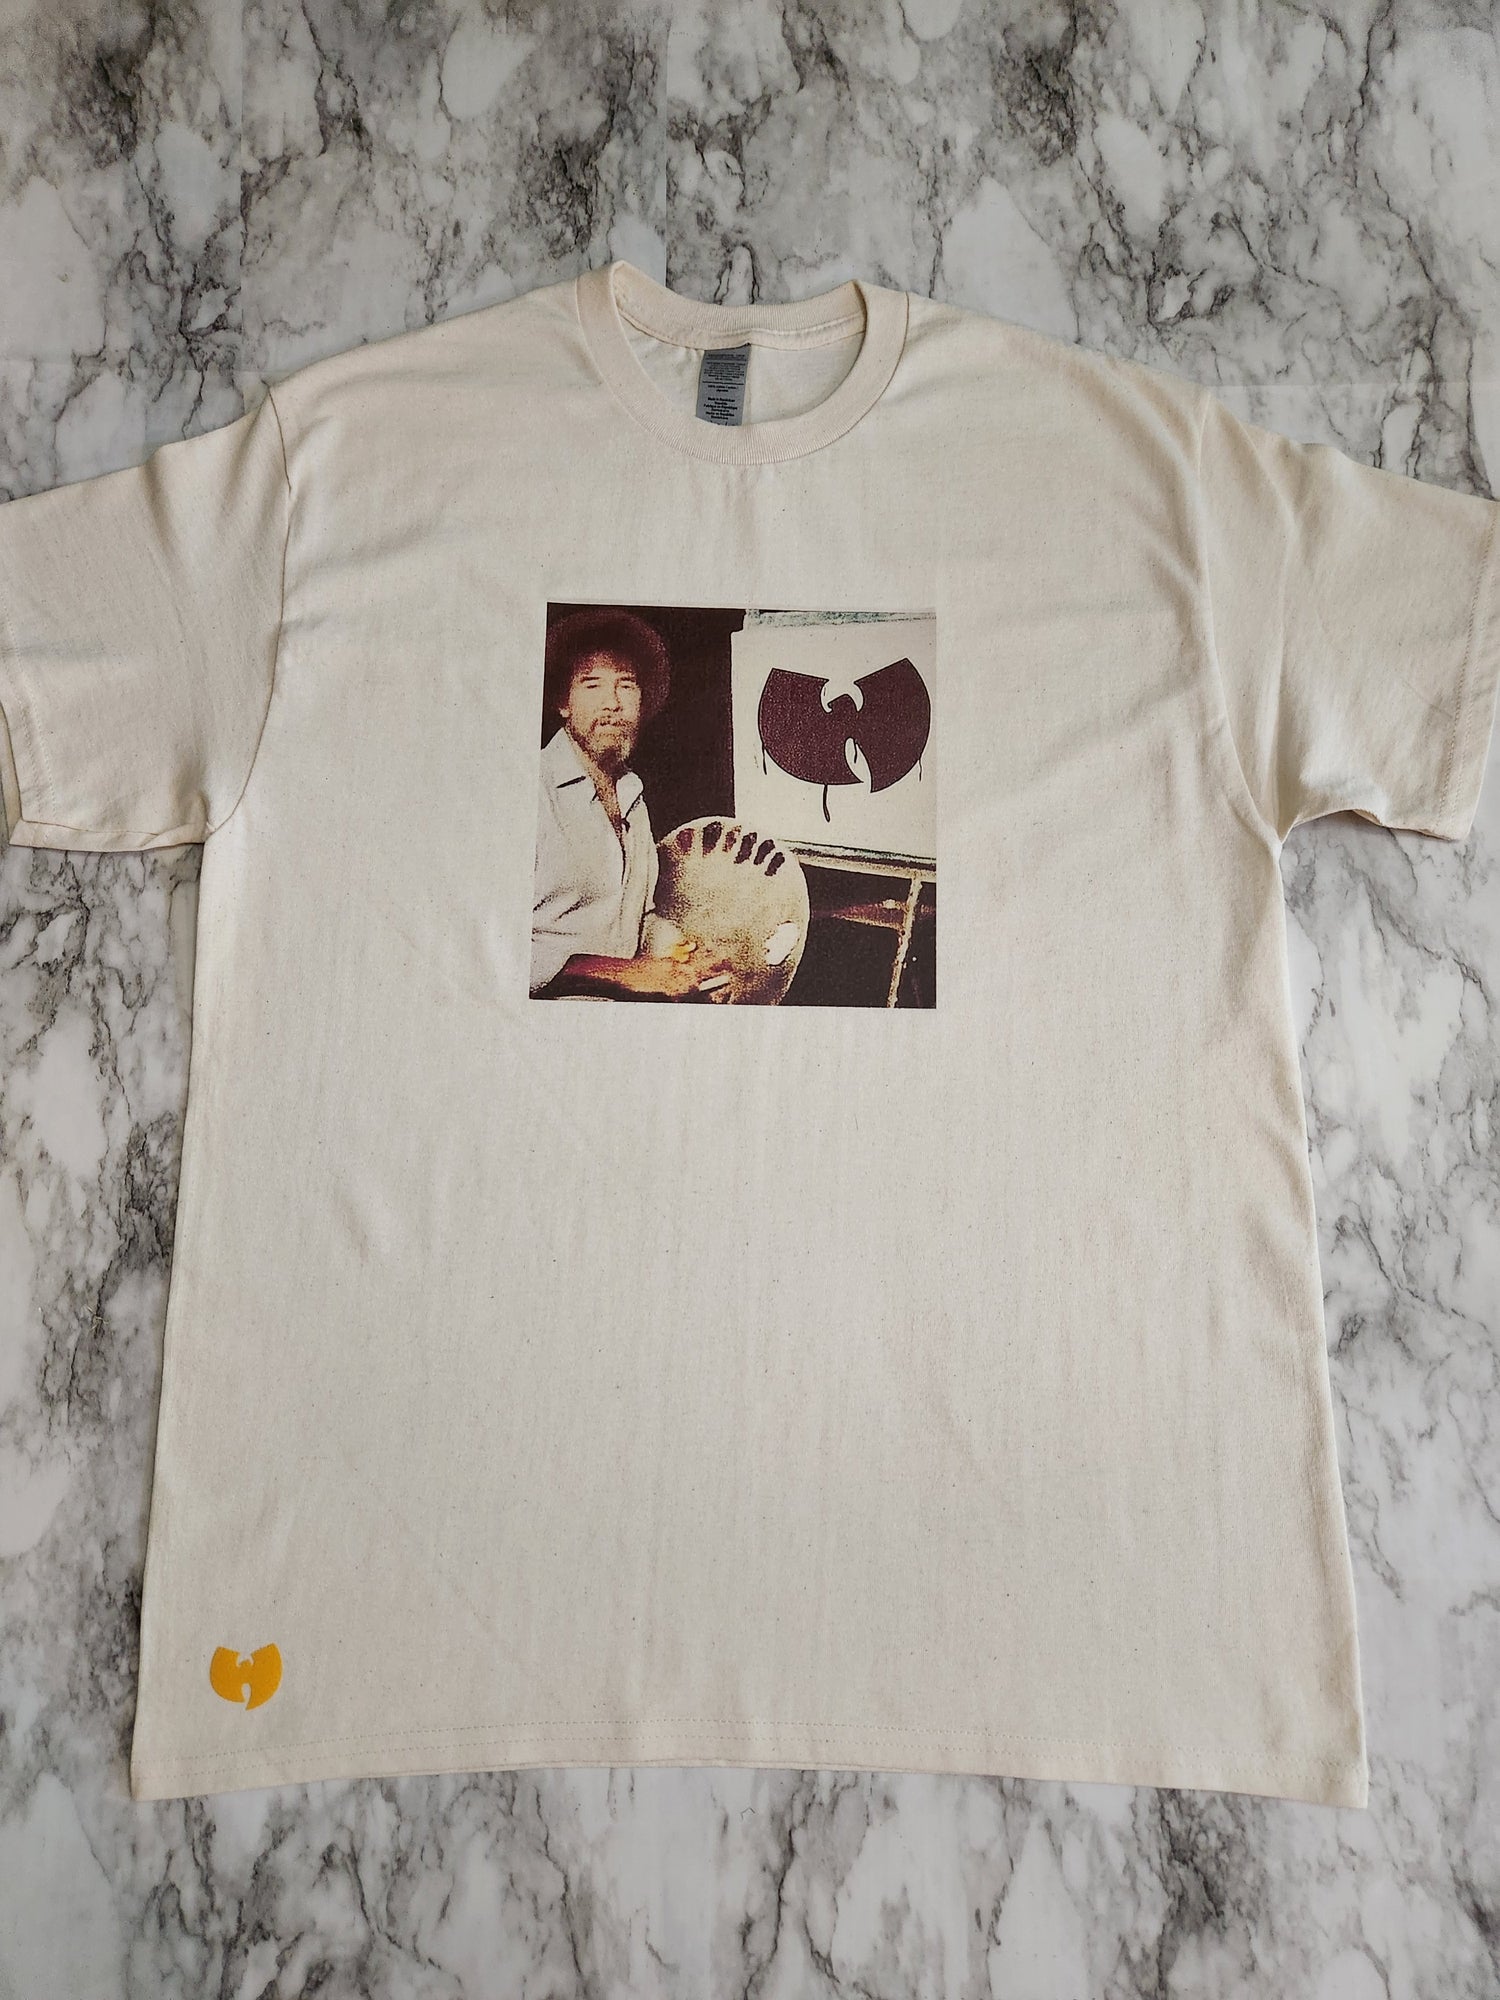 Wu Ross T-Shirt - Centre Ave Clothing Co.